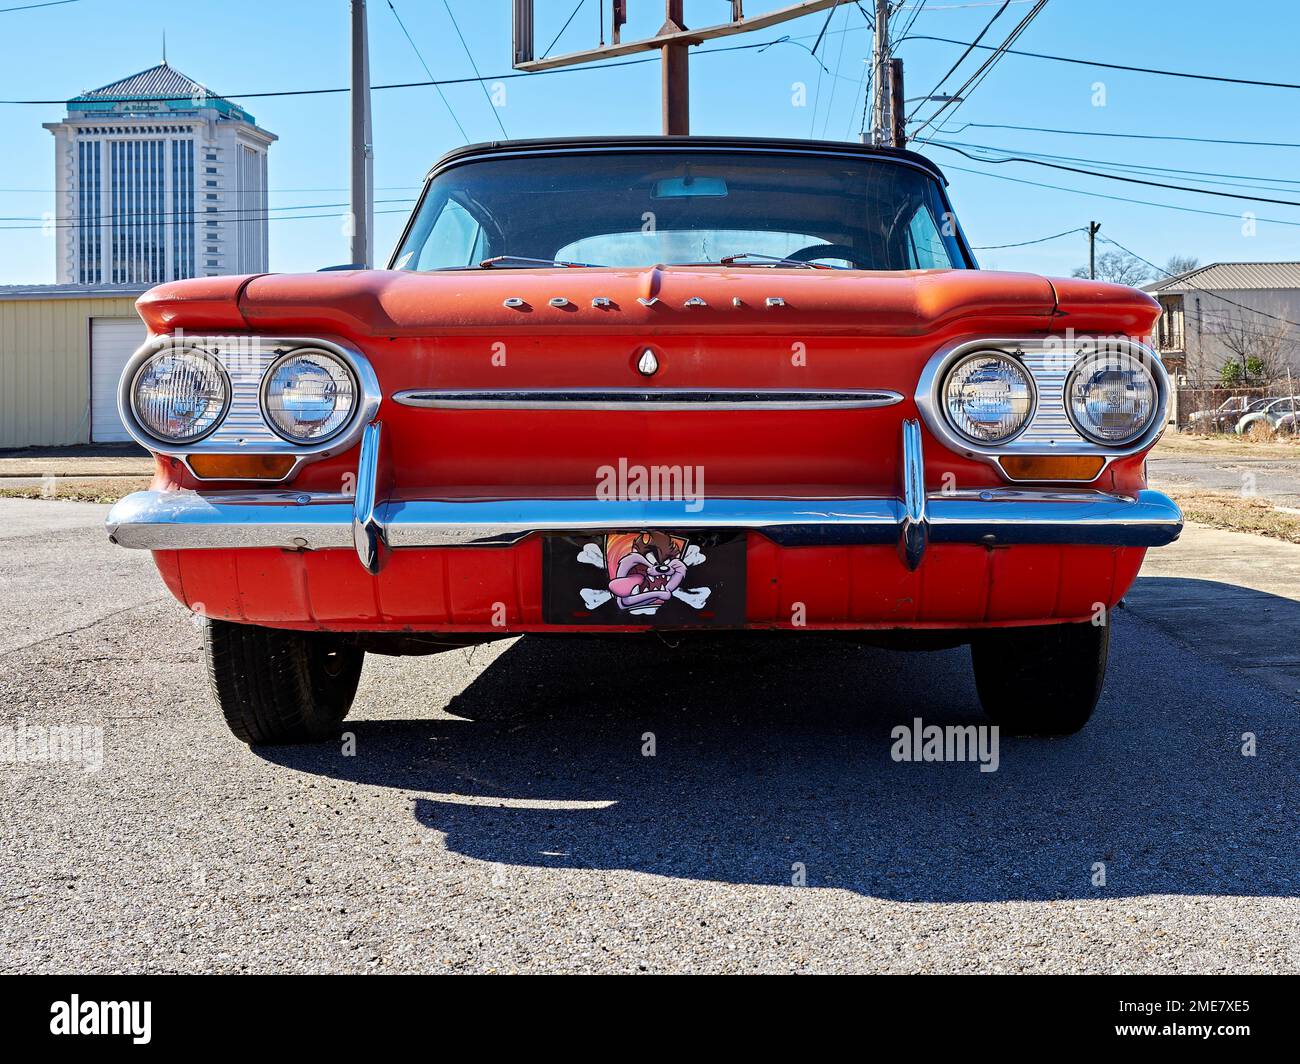 Vintage 1963 Chevrolet or Chevy Corvair 900 Monza Spyder car or automobile front view of the grill. Stock Photo